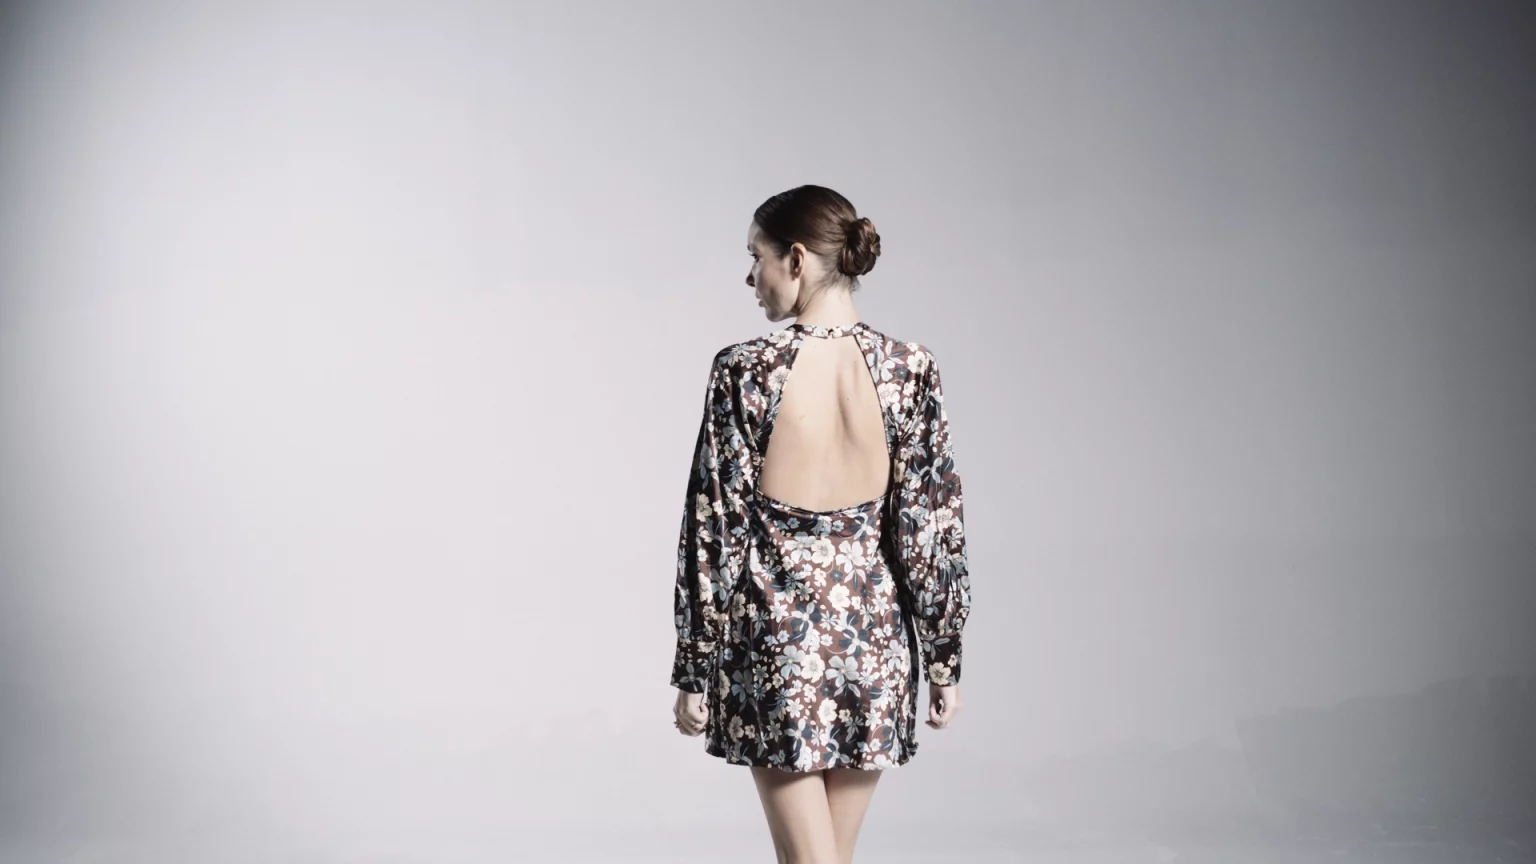 View From Behind Of Woman Wearing A Flowery Outfit